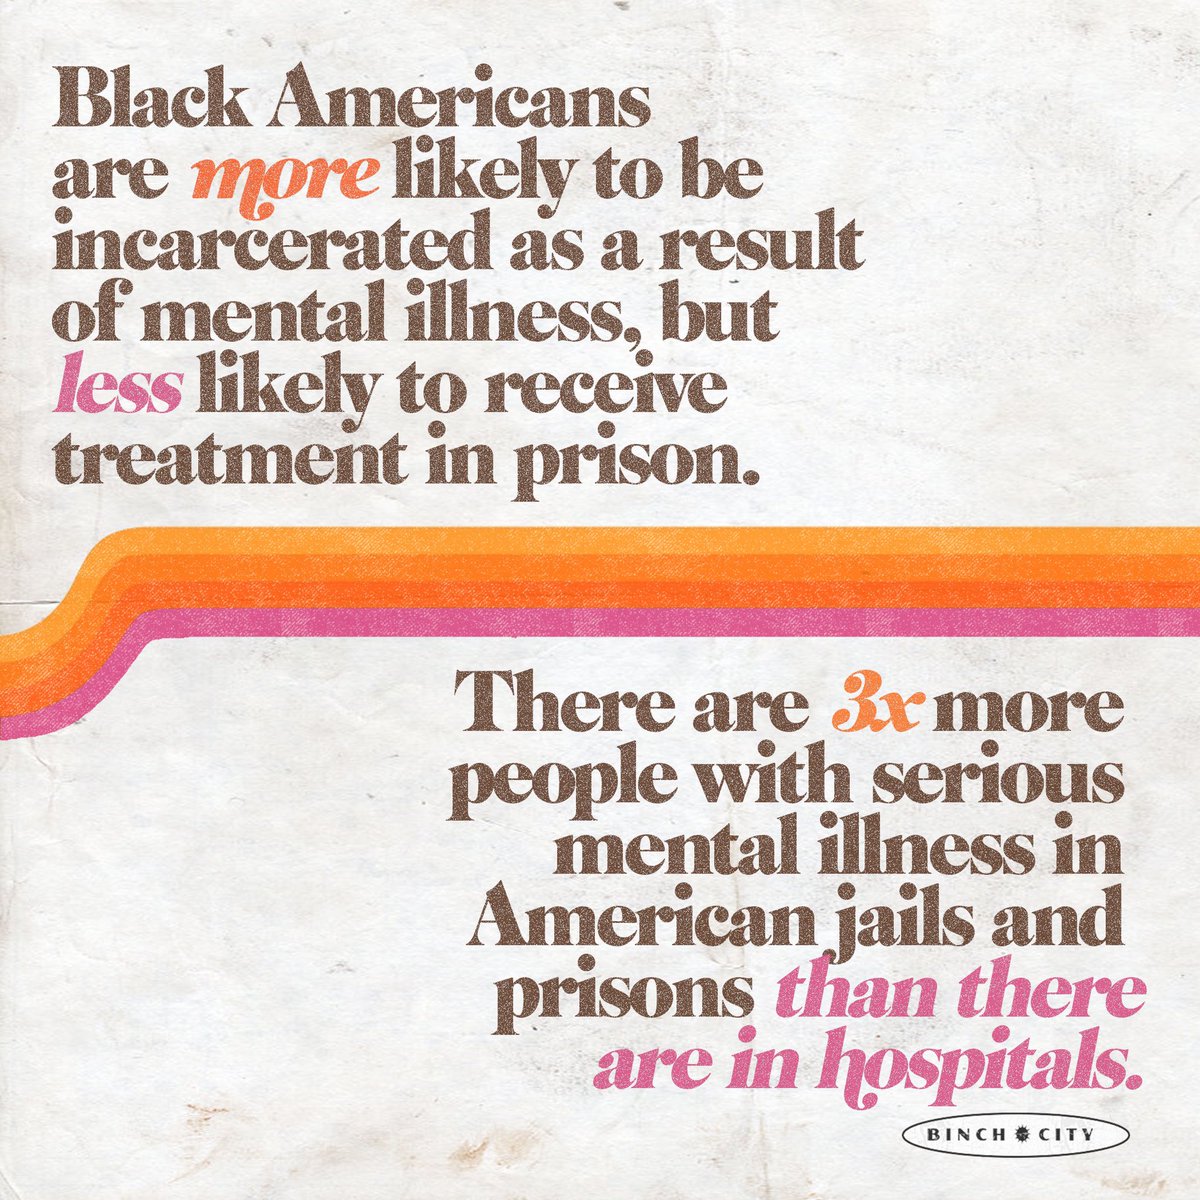 Last year I wrote a history thesis on psychiatric abuse against WOC. In writing it, I learned a lot of information on the ways racial bias has affected Black Americans with mental illness. Racism has long been embedded within the field of psychiatry + still remains today. [1/10]